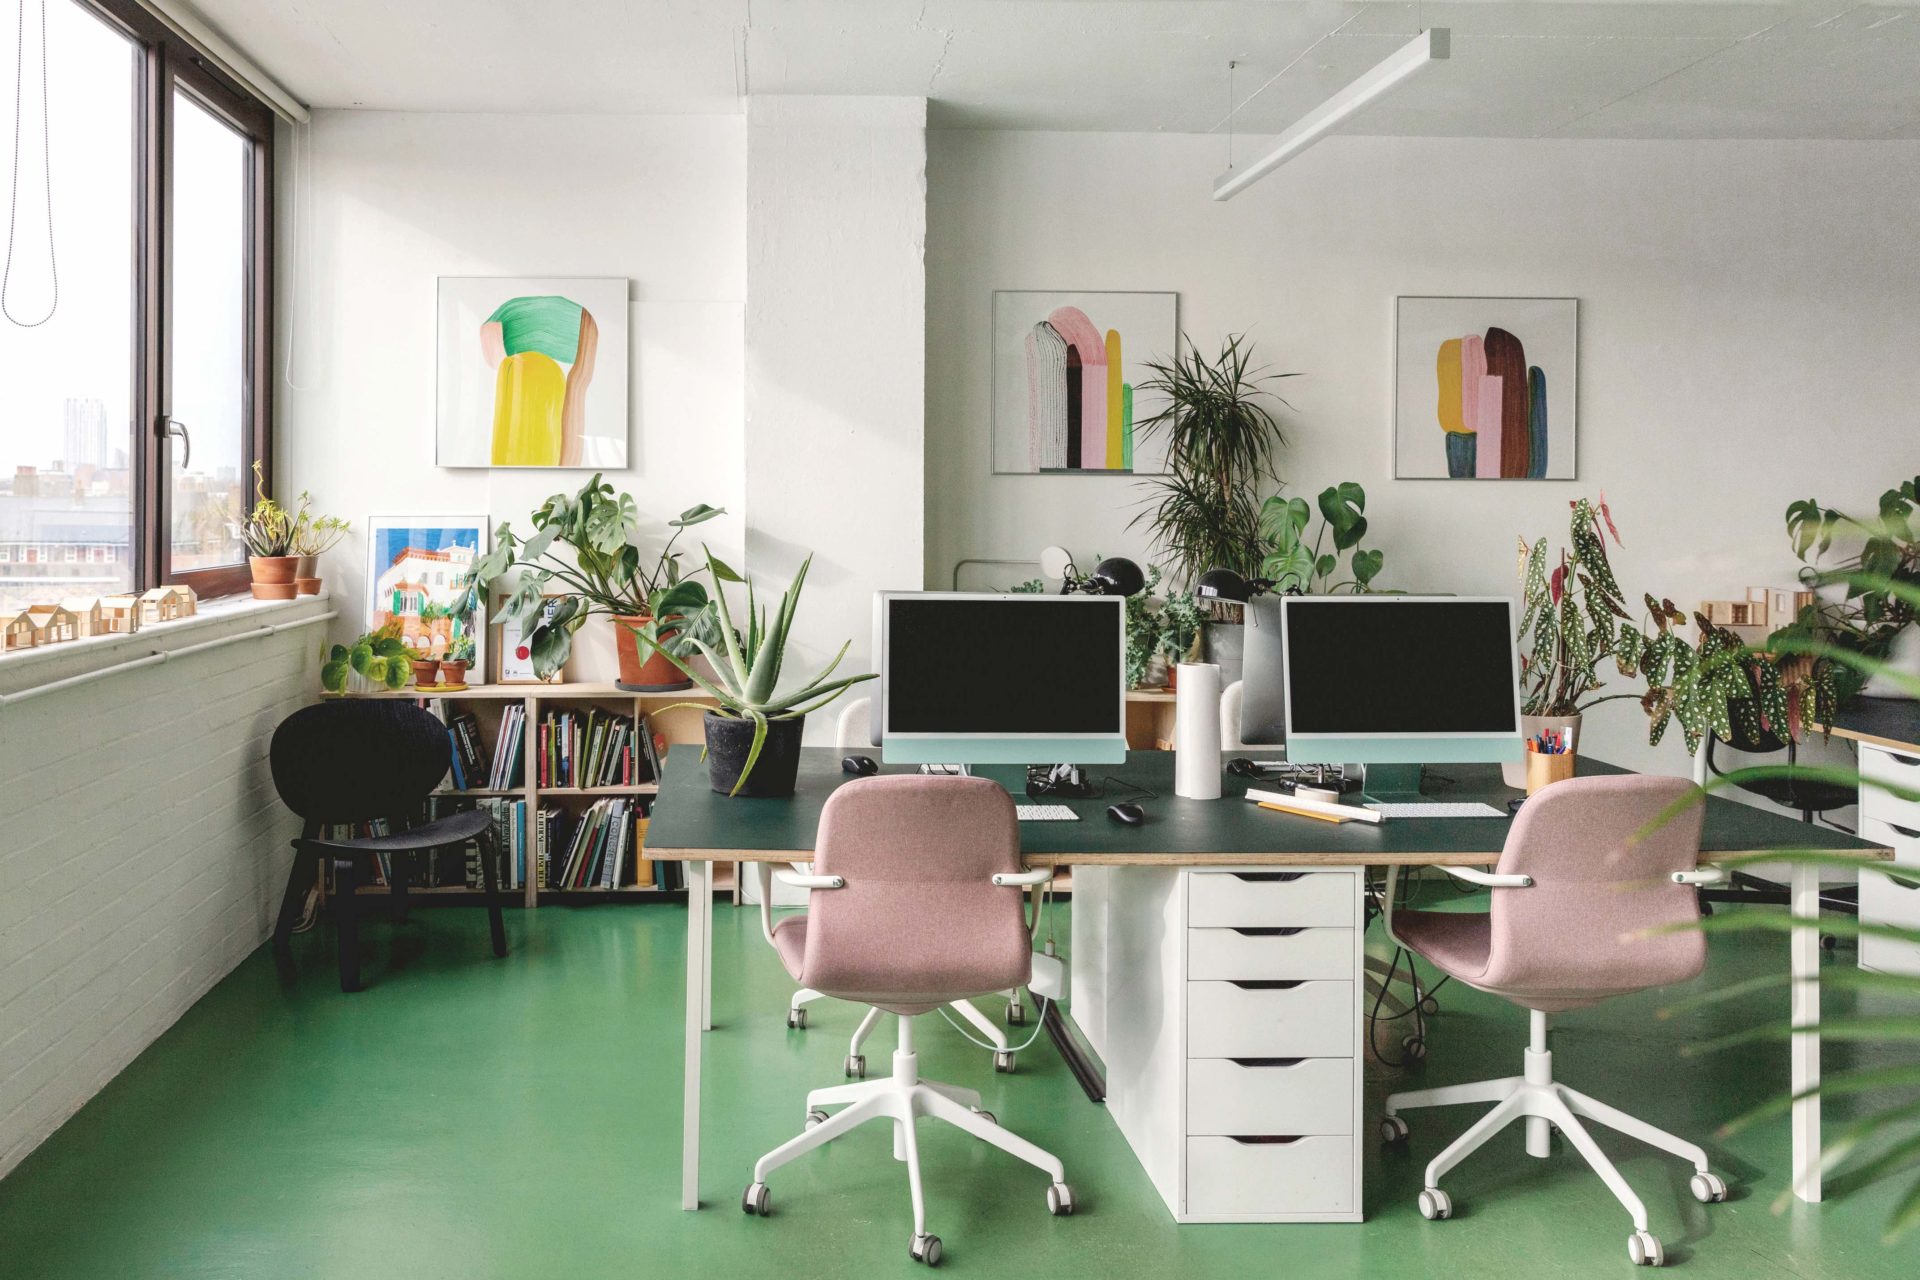 Emil Eve Architects Studio desks with pink chairs